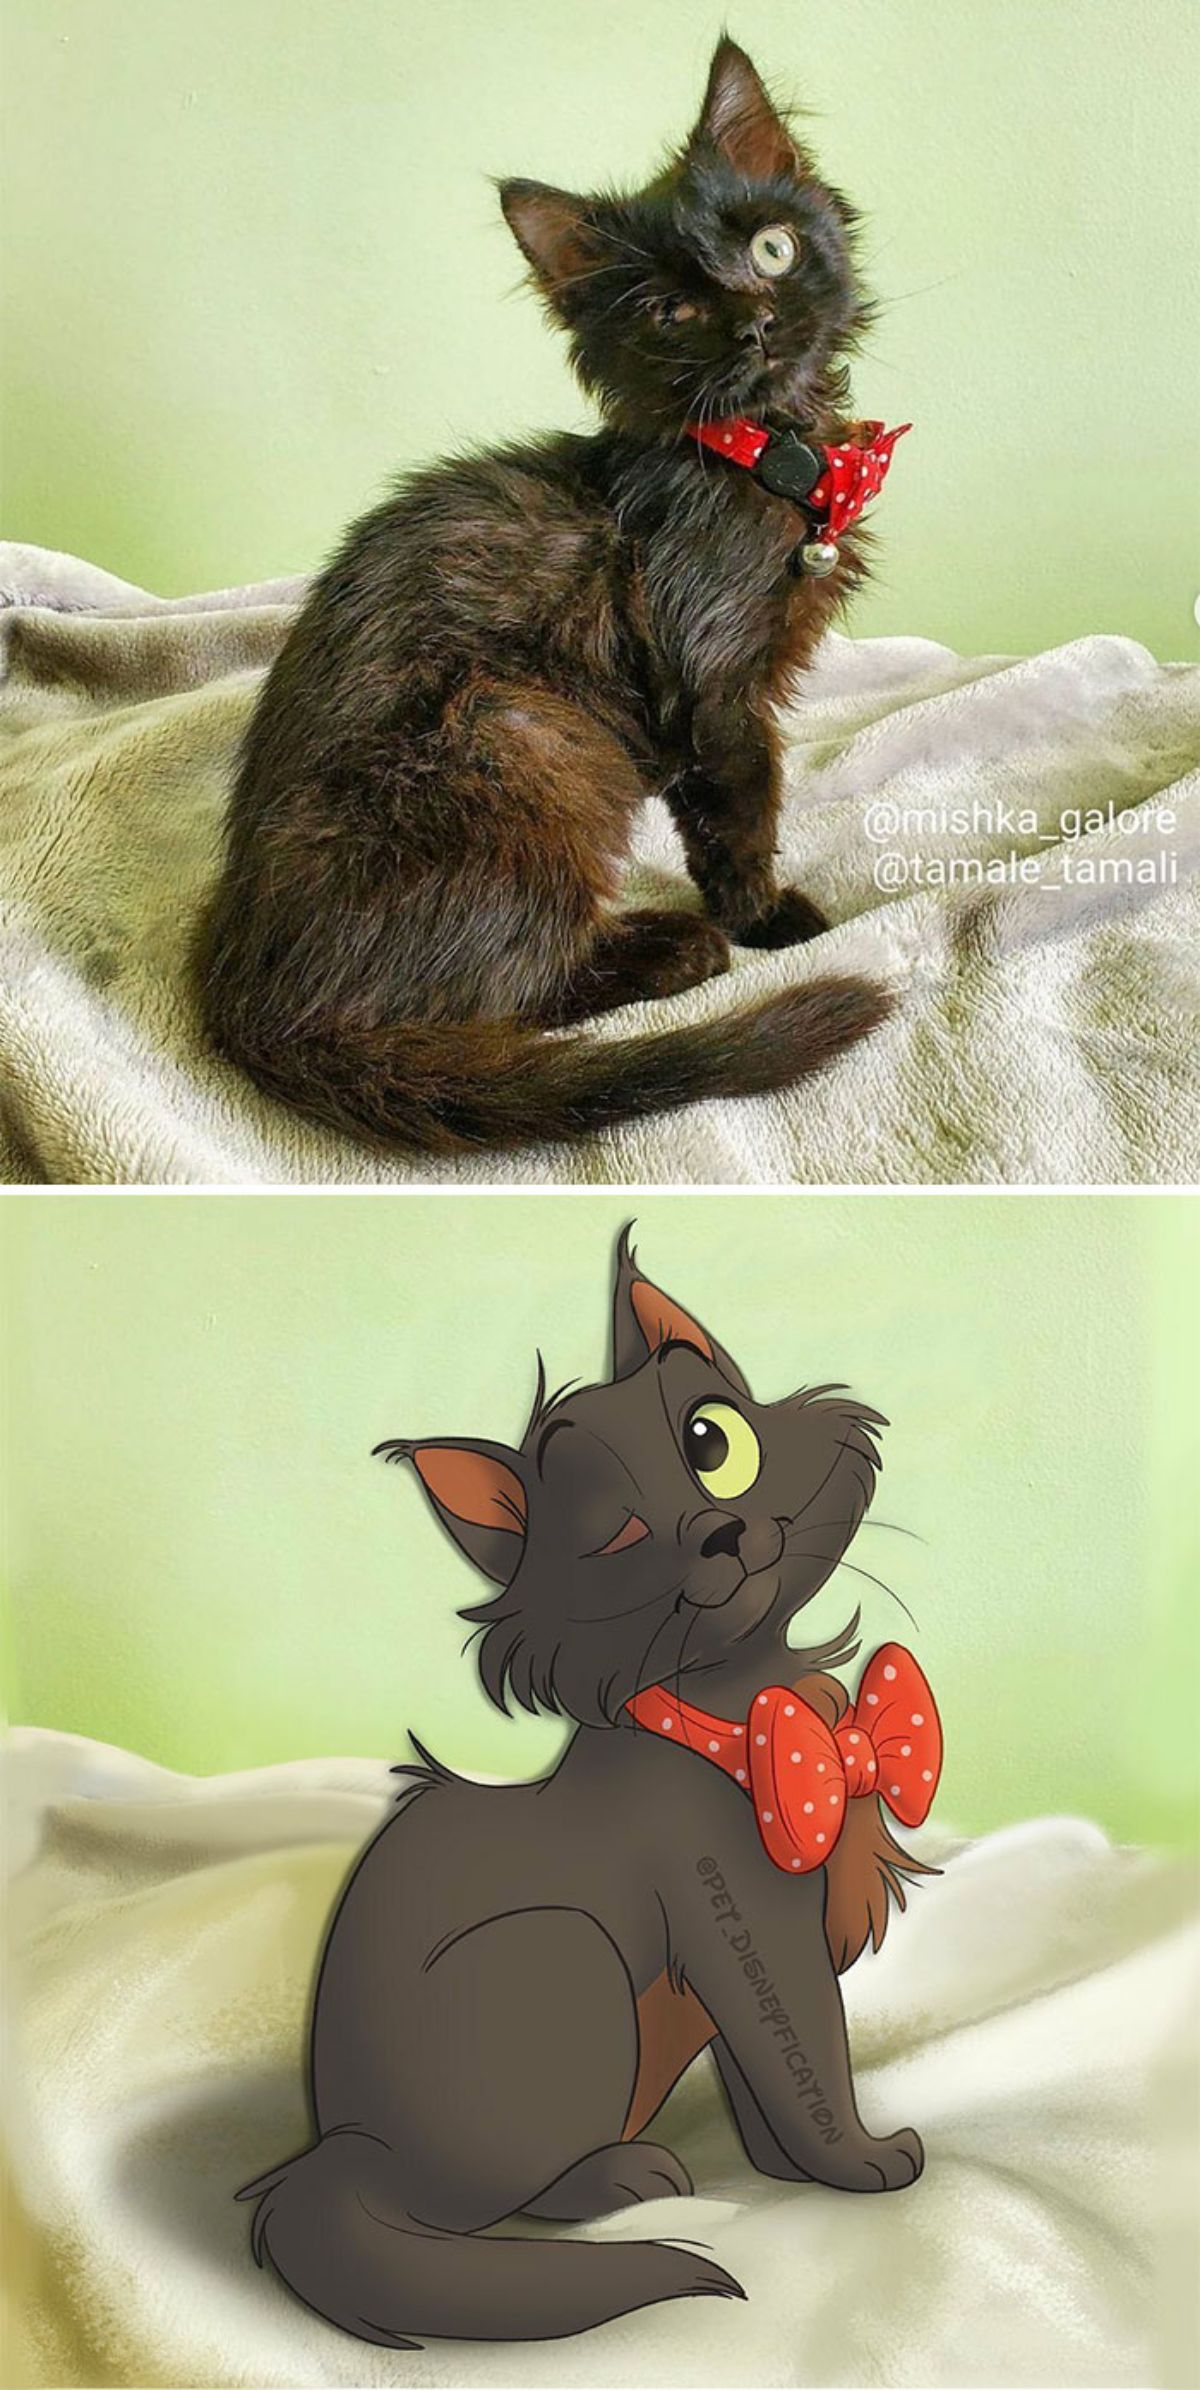 real photo and cartoon image of a one-eyed black cat wearing a red and white bow tie